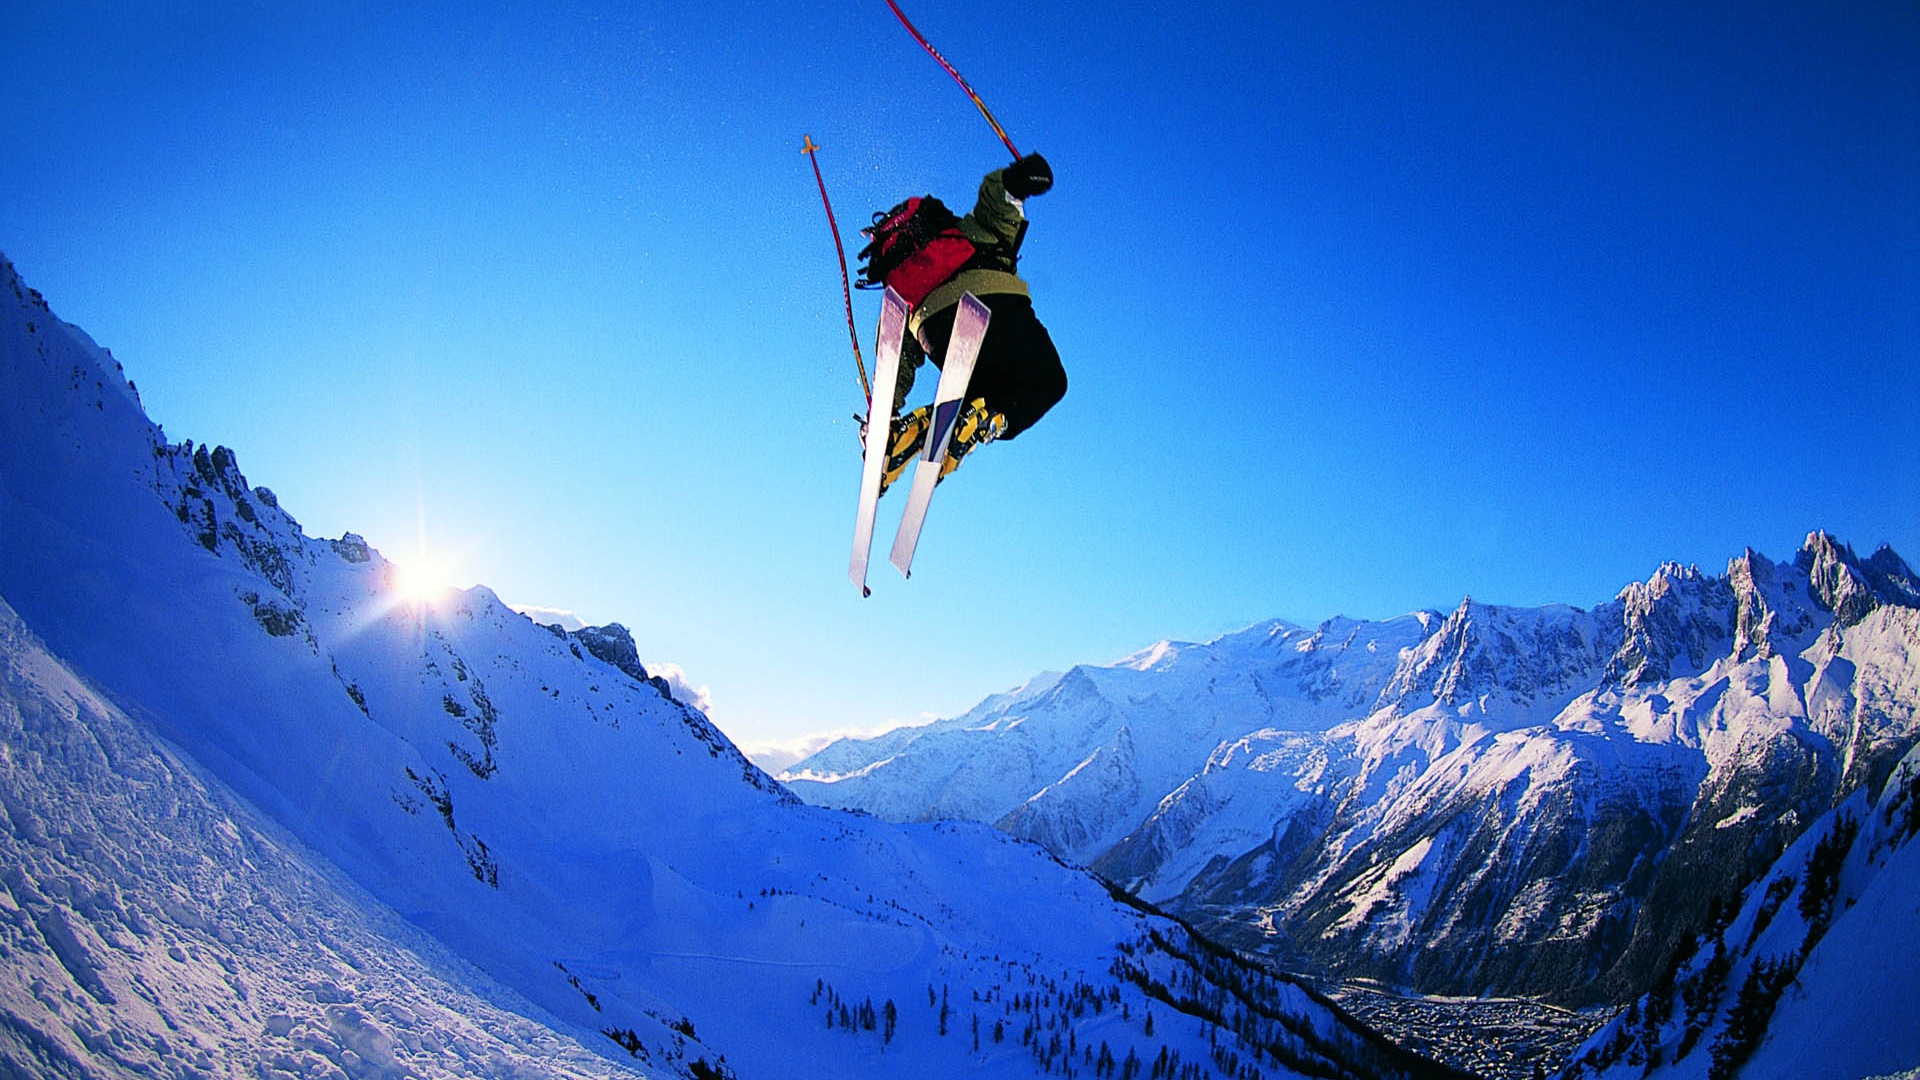 Snowboarding Skiing Wallpaper High Definition Quality